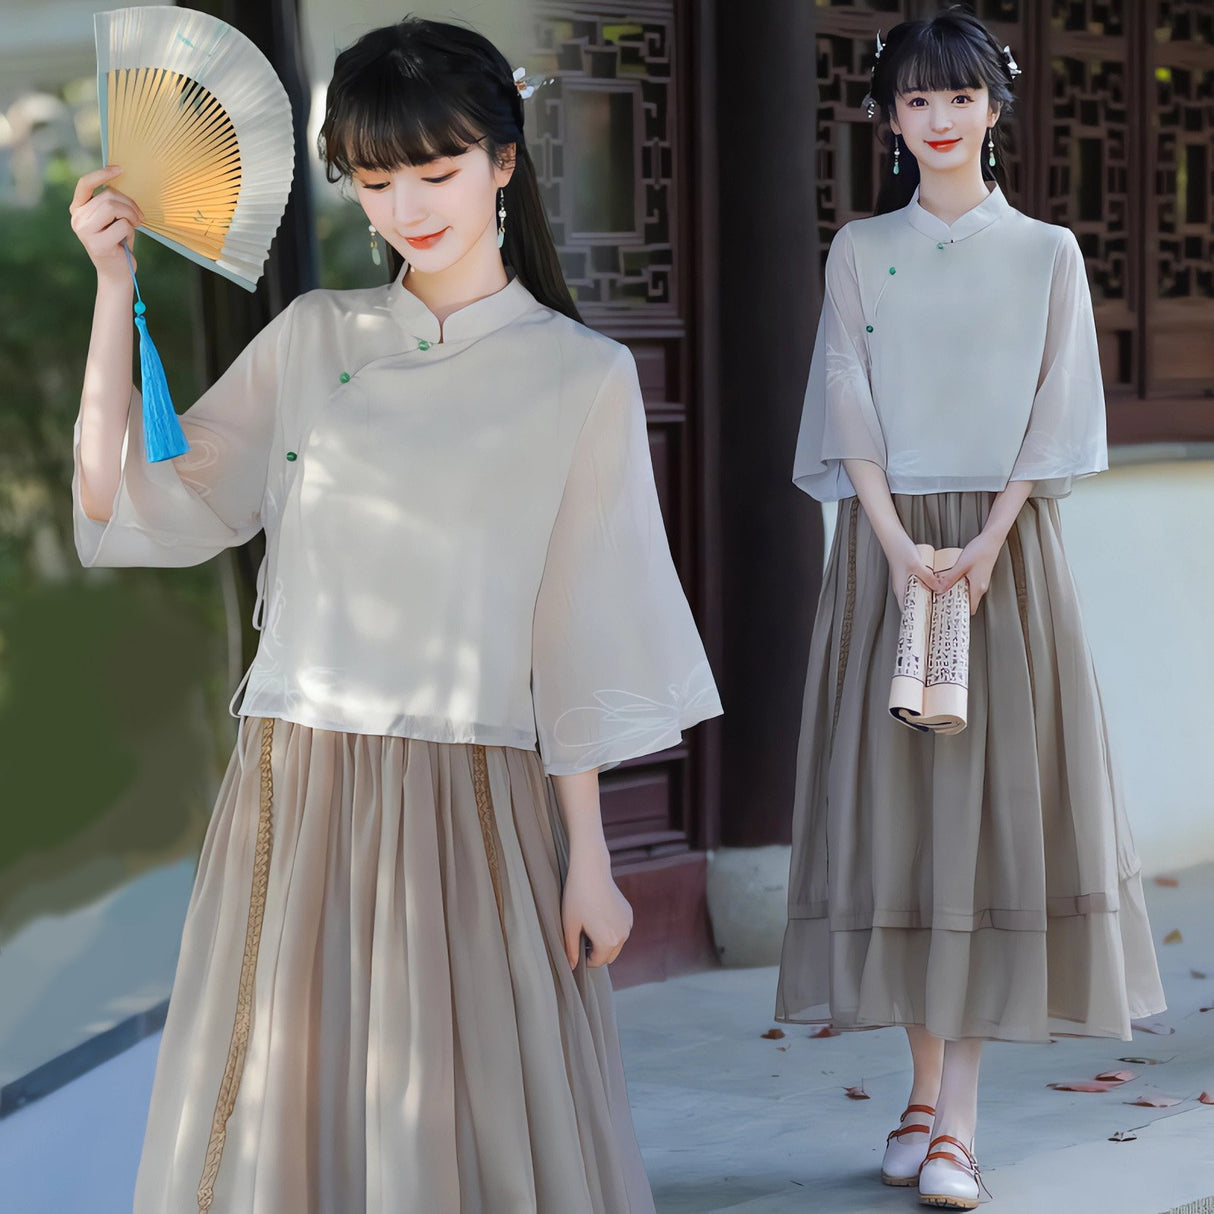 Ivory & Earth Tone New Chinese-Style Cultural Dress Suit